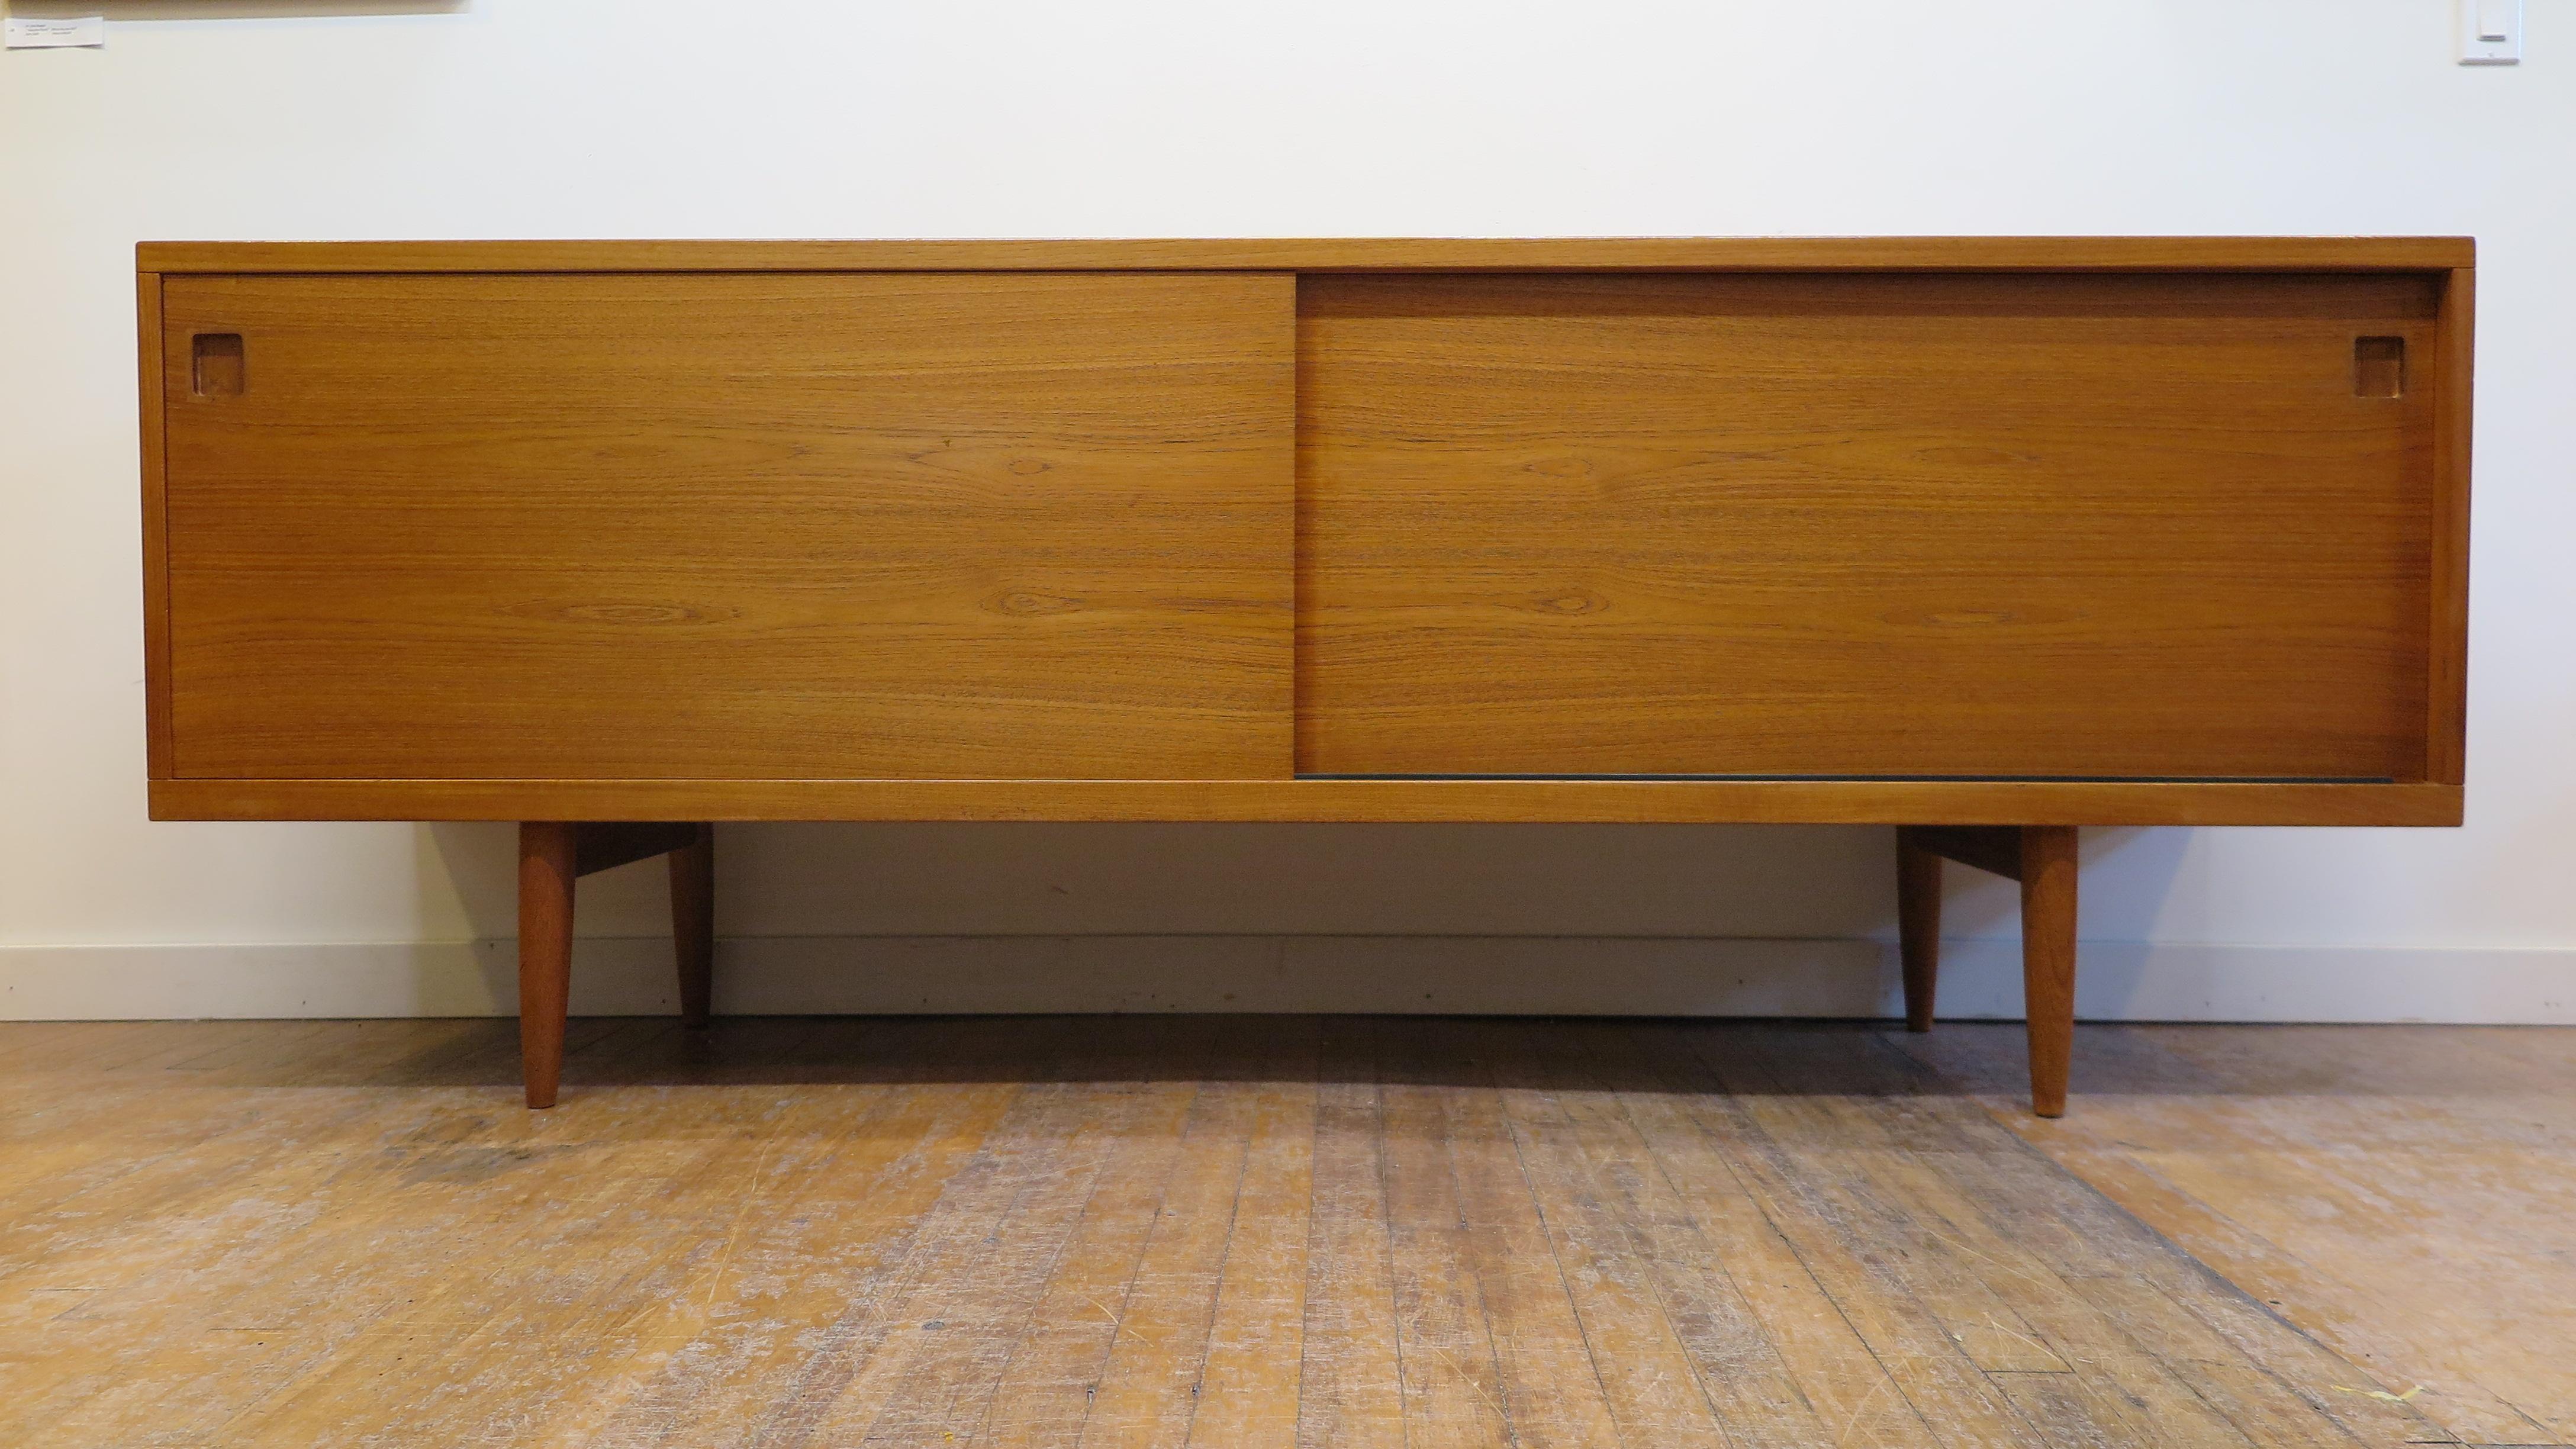 Niels Otto Moller Danish modern sideboard model 20 in teak. An exceptional example of Danish modern furniture and design. Two sliding doors open to adjustable shelfs with four sliding drawer style shelfs. Minimal simple clean functional timeless